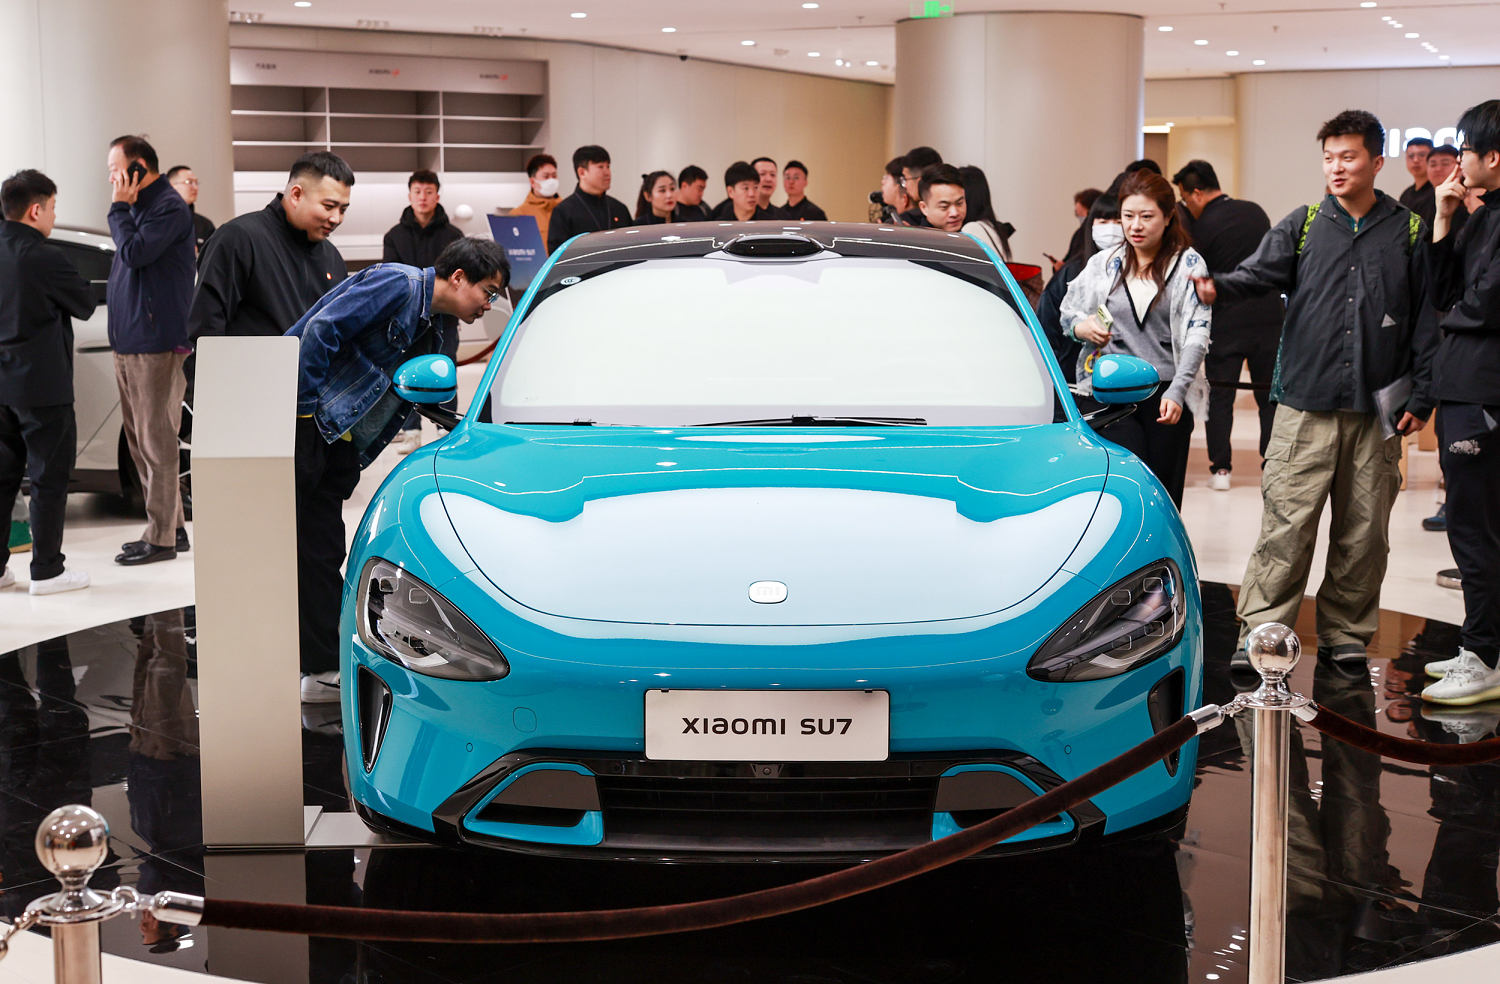 China’s latest EV is a ‘connected’ car from smartphone maker Xiaomi